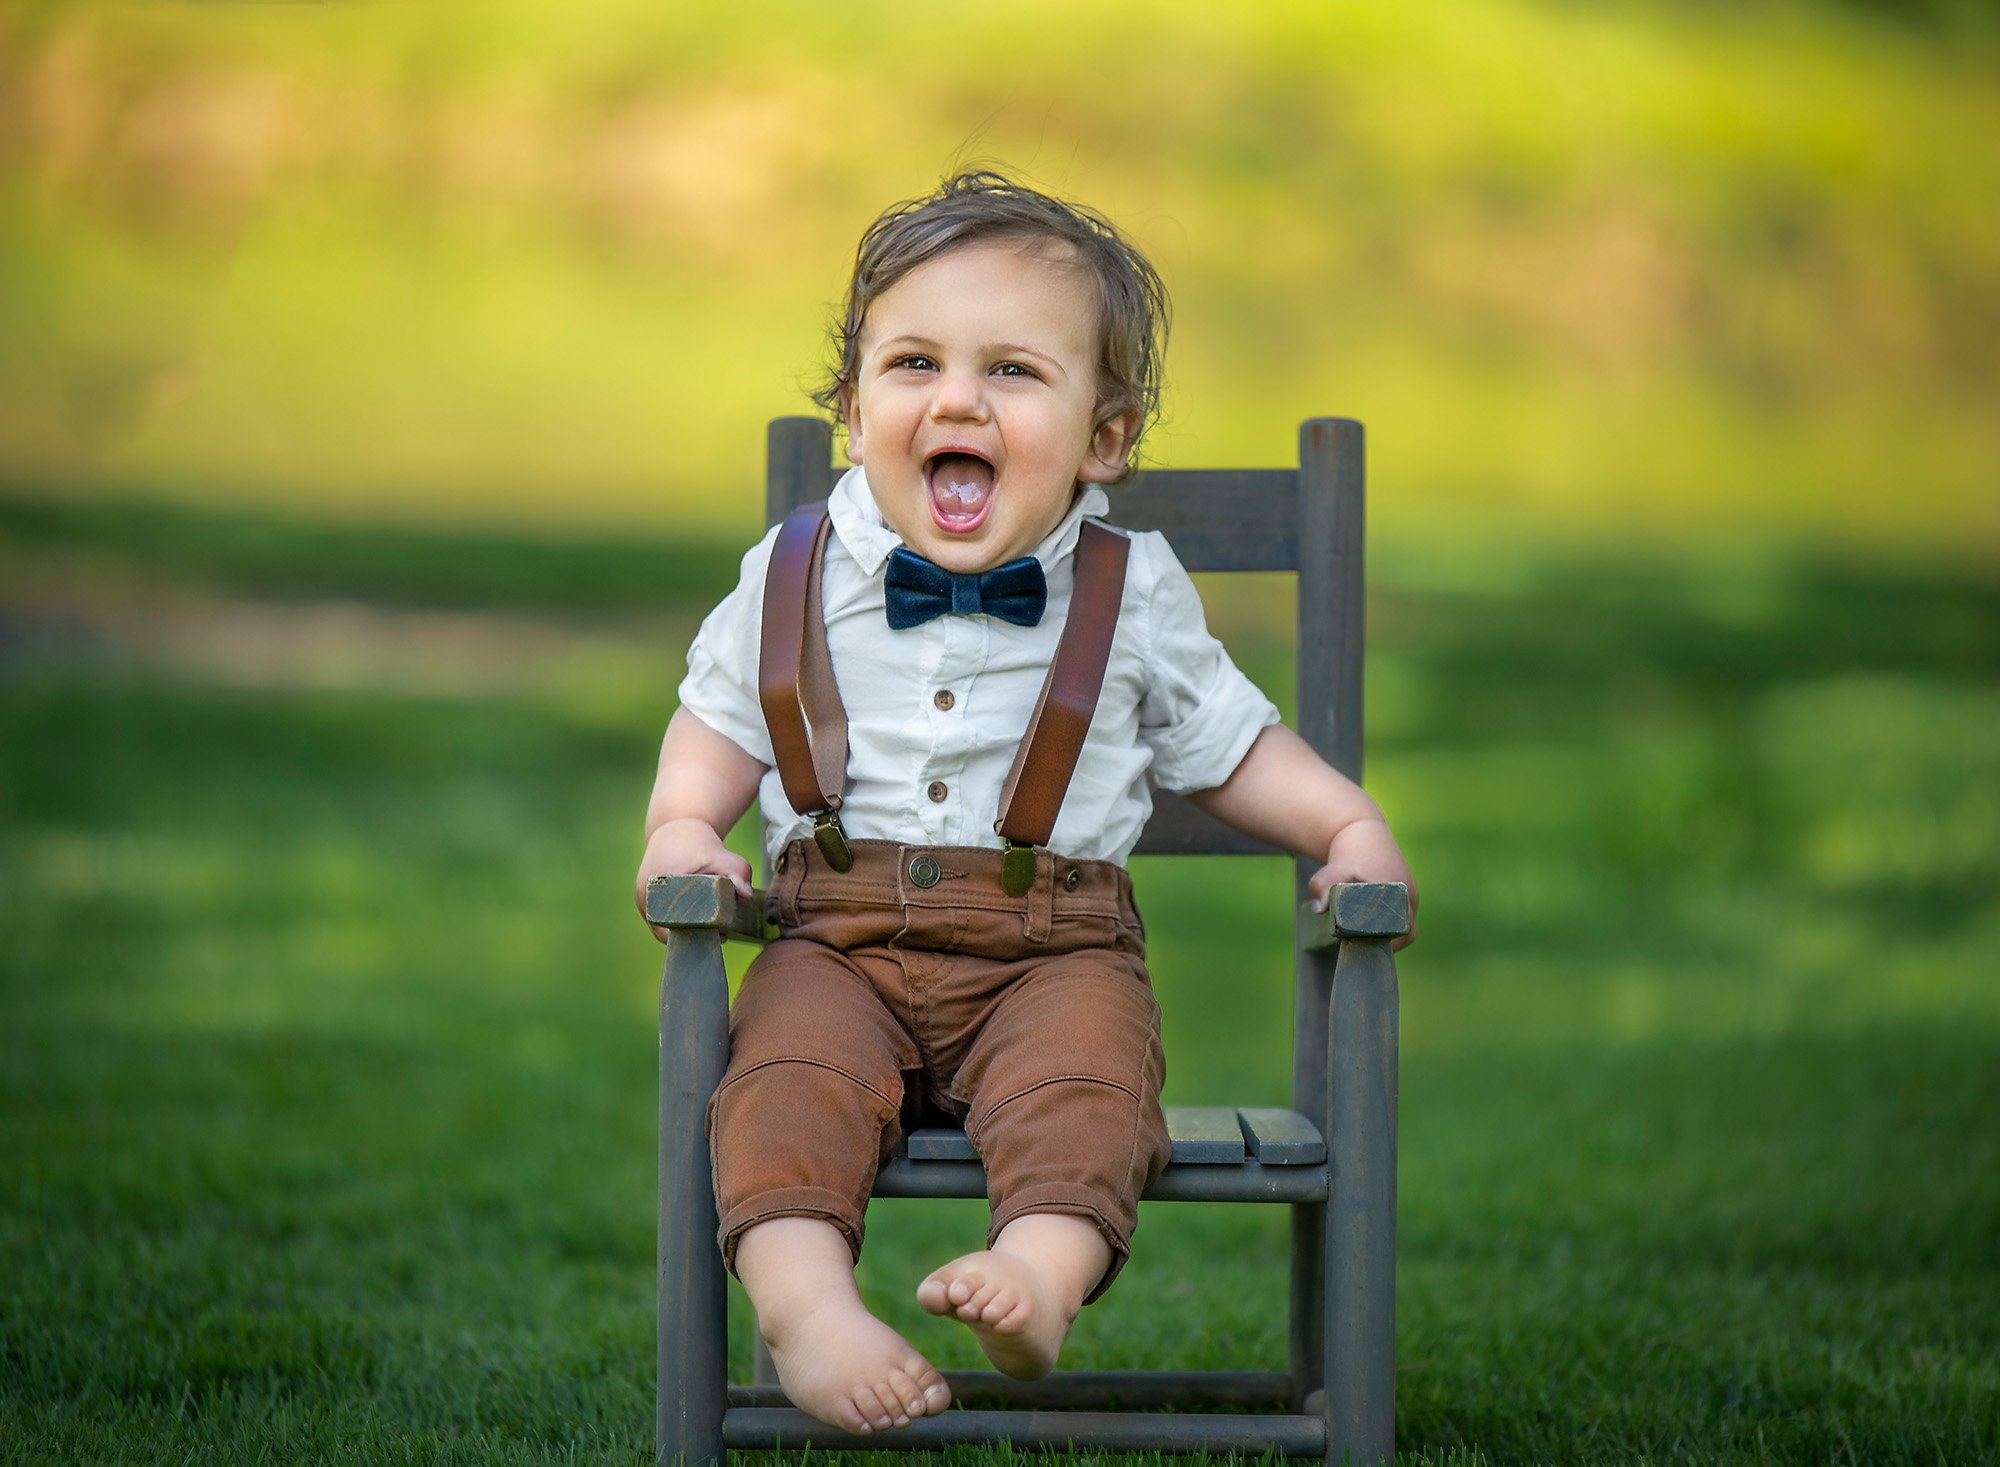 1 year baby photoshoot one year old boy wearing overalls laughing while sitting in a rustic chair